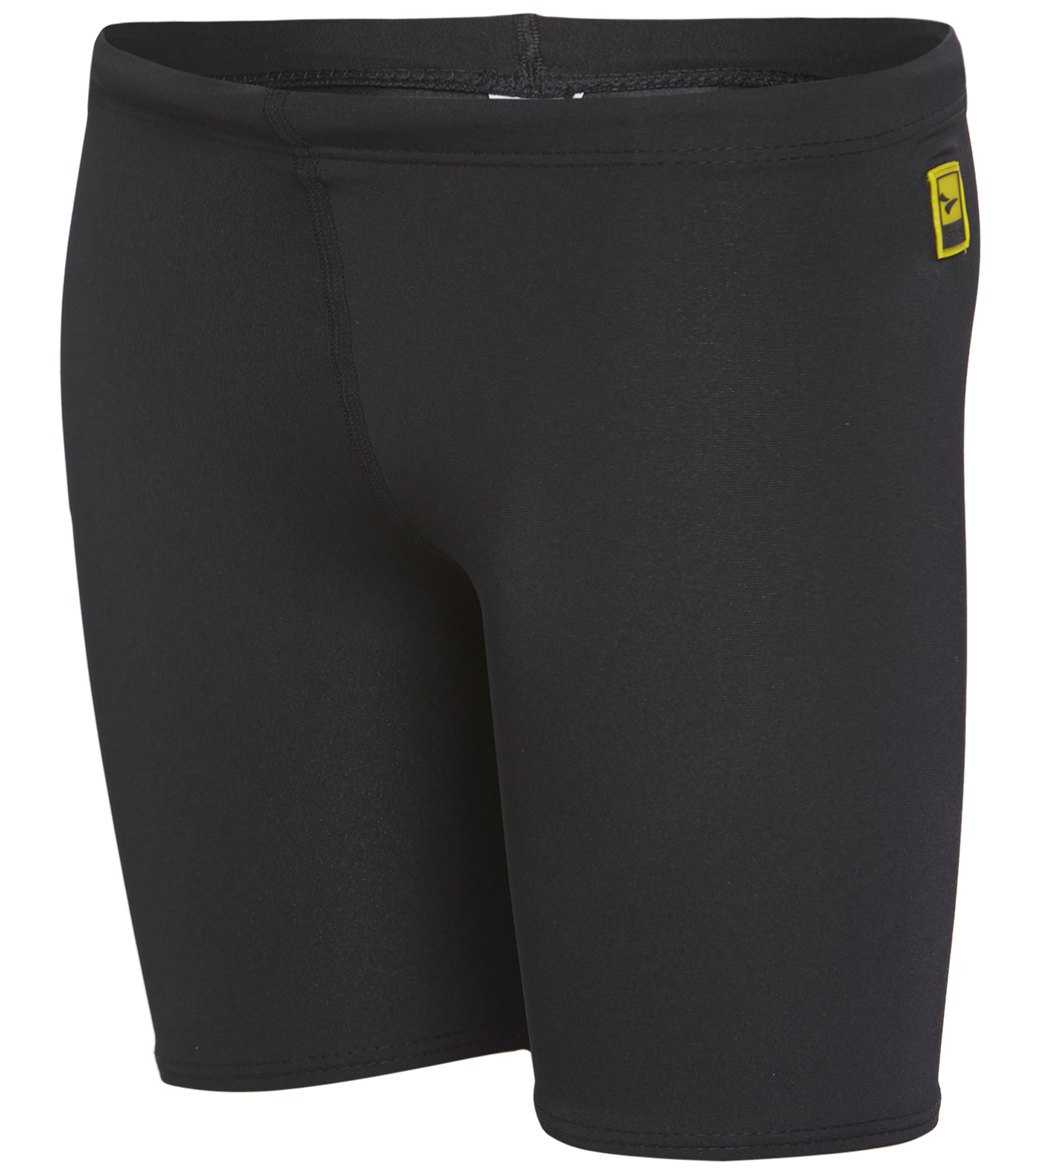 Finis Boys' Solid Jammer Swimsuit - Black 18 - Swimoutlet.com